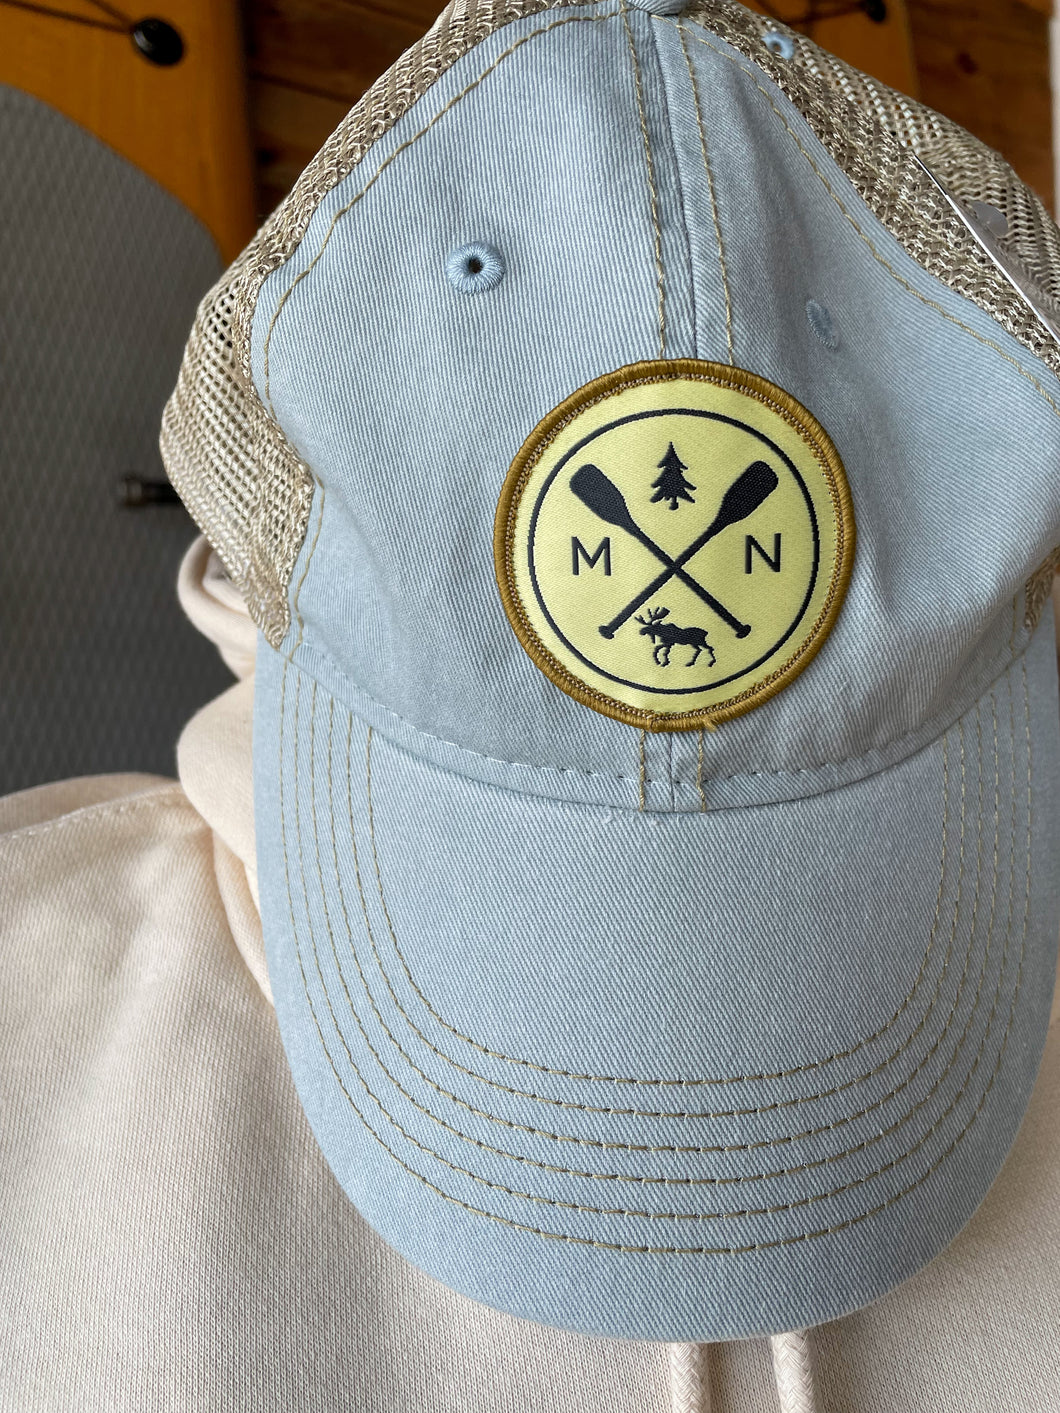 Light blue hat with patch featuring cross paddles, moose, and tree